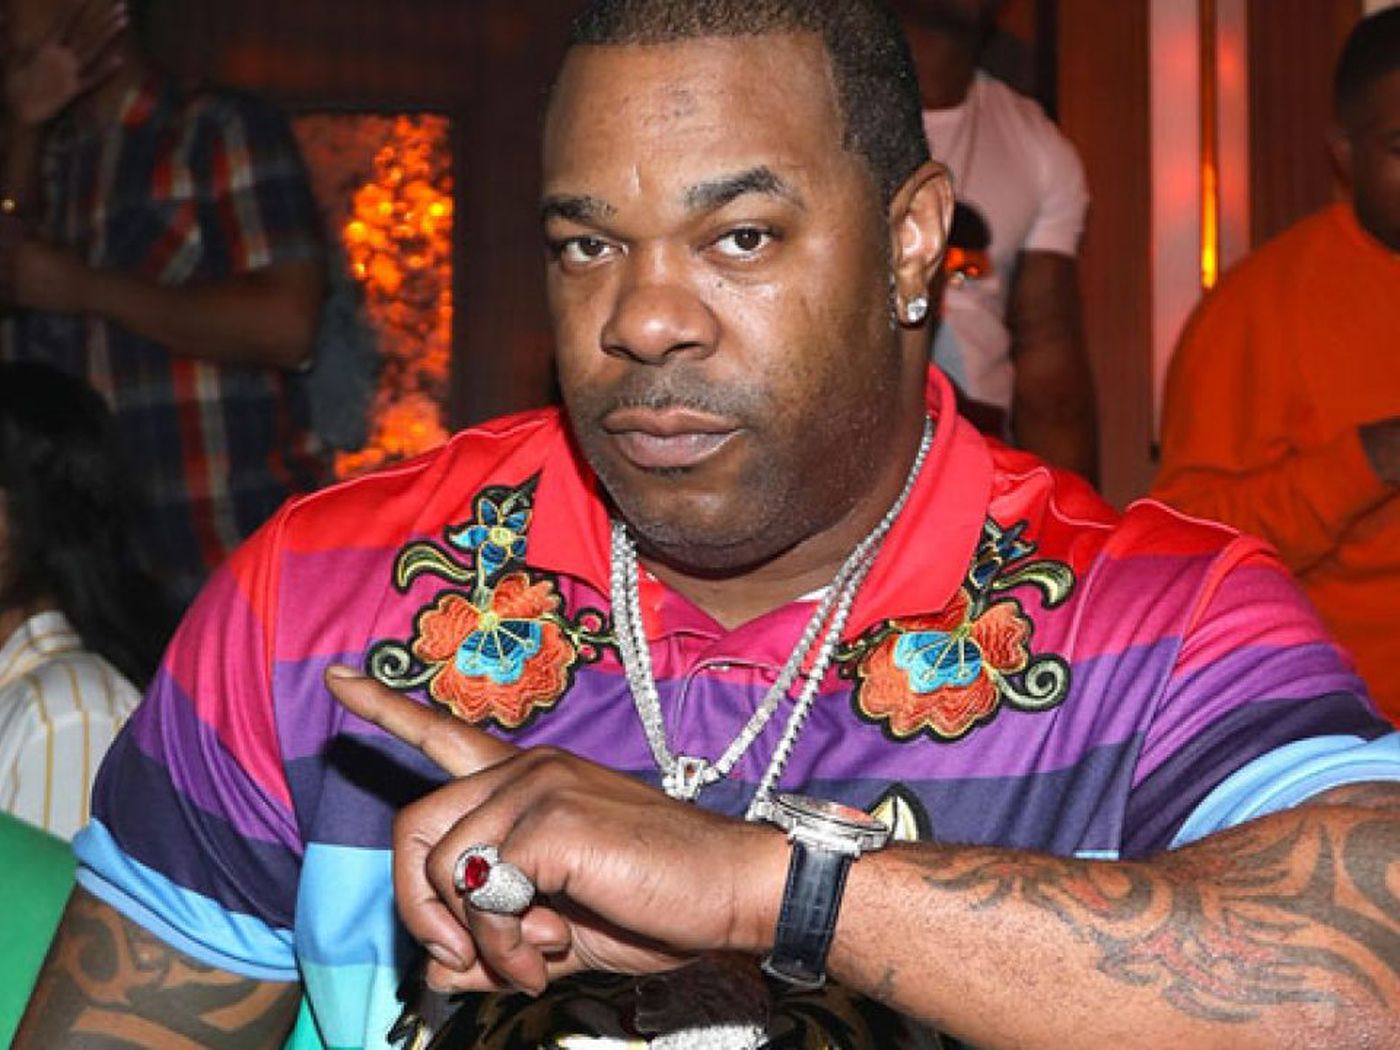 Busta Rhymes E.L.E. 2: The Wrath of God Album review